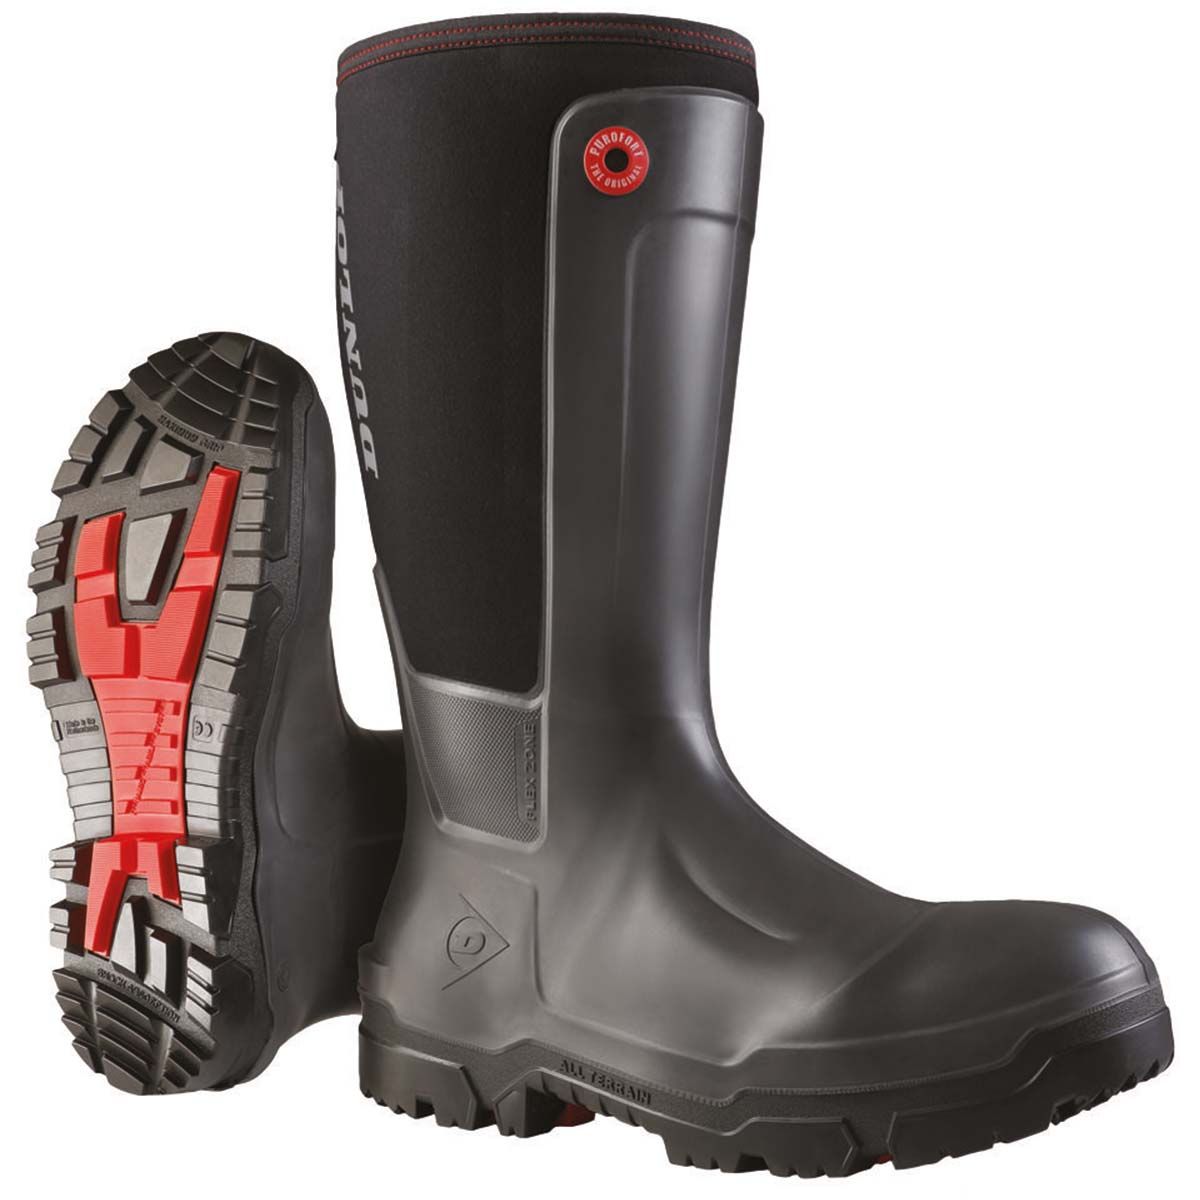 Cizme protecție Dunlop Snugboot WorkPro Full Safety